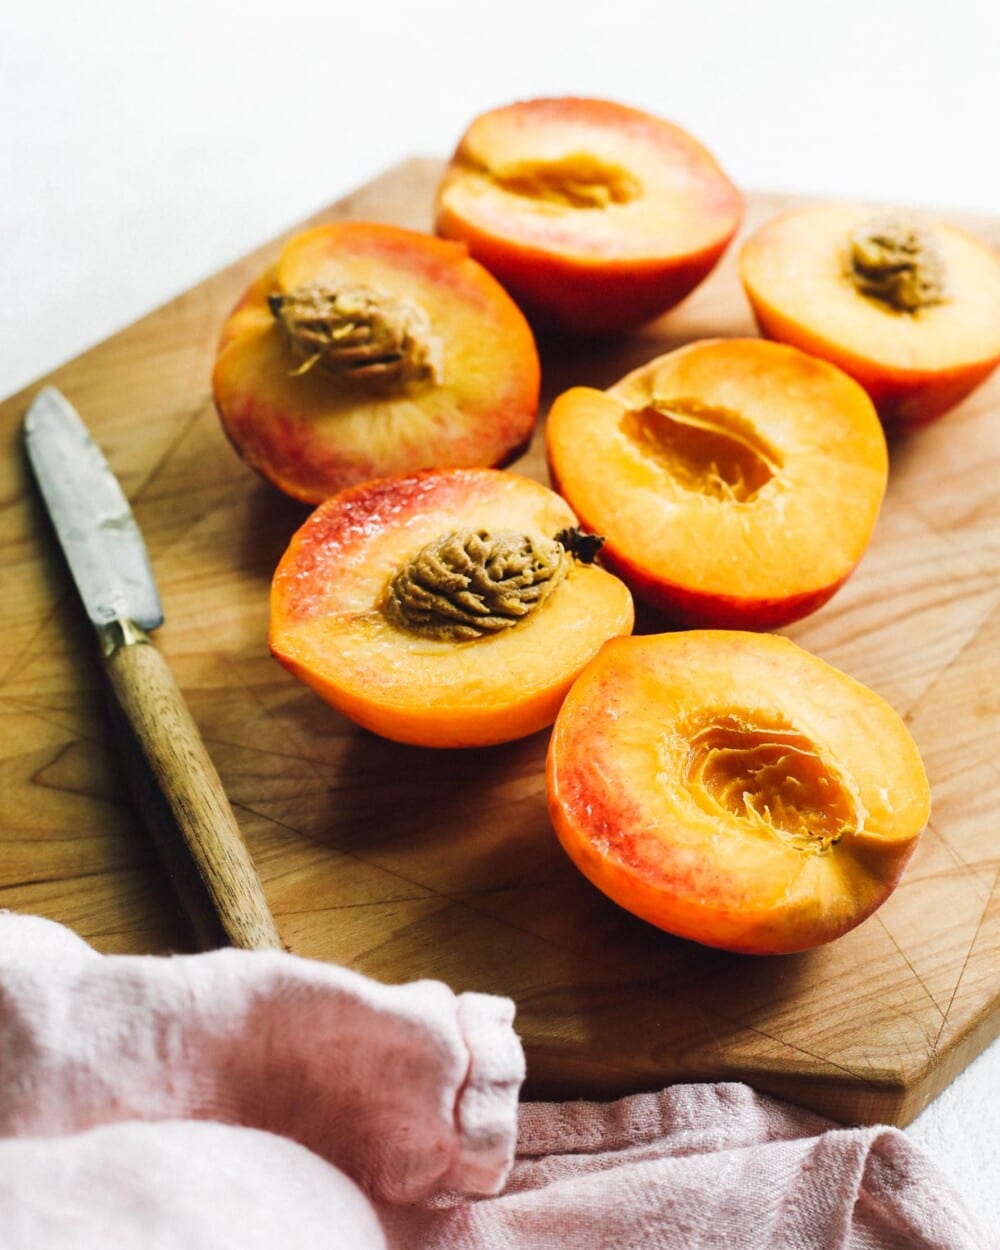 peaches sliced in half on a wooden cutting board